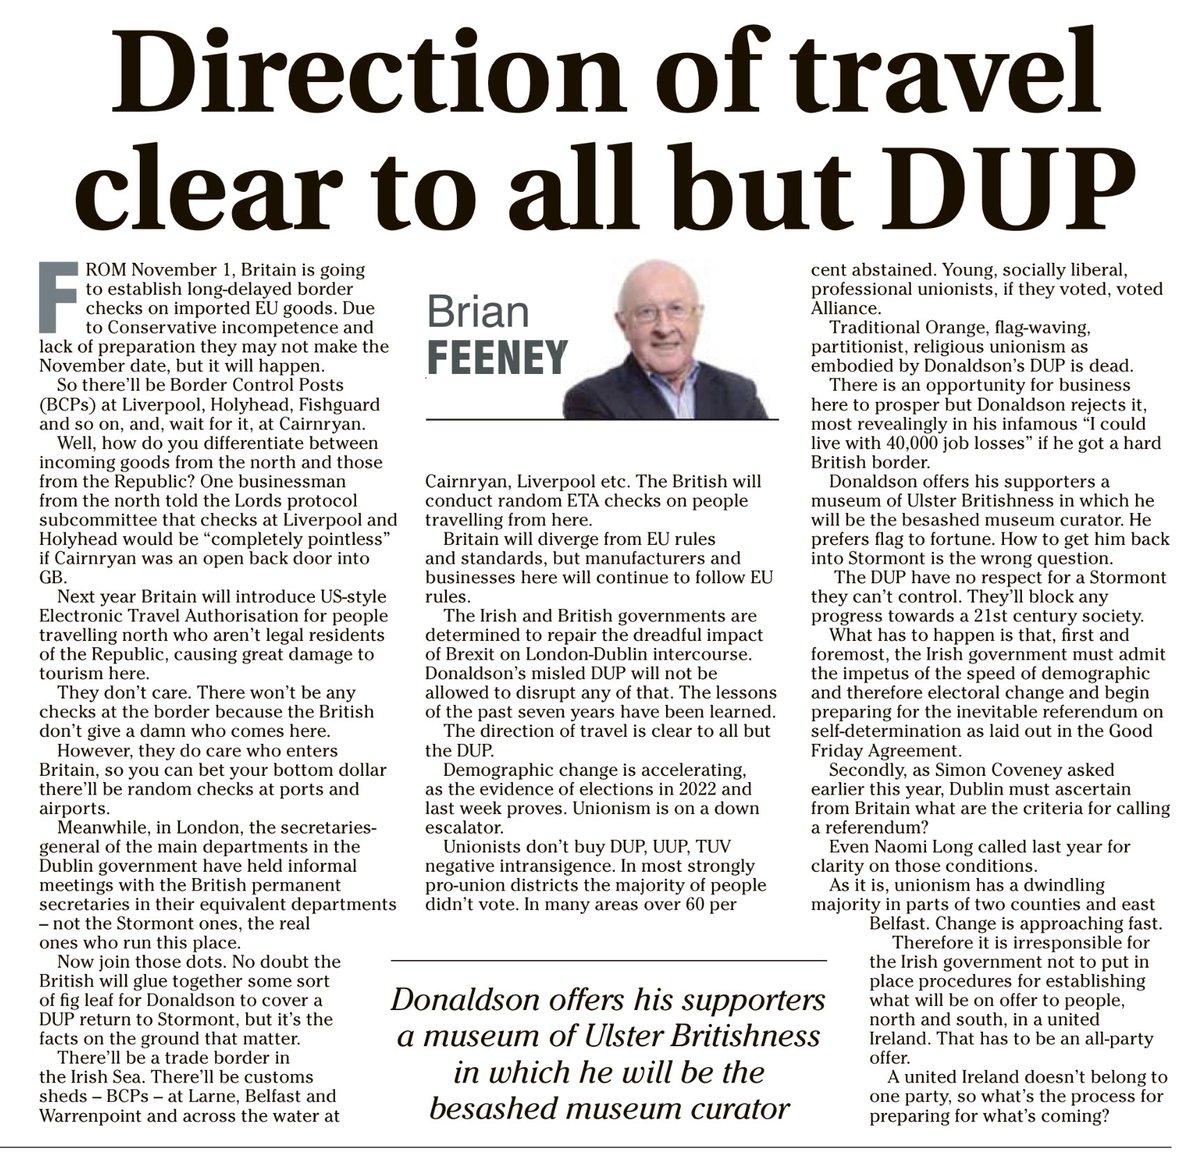 “The DUP have no respect for a Stormont they can’t control. They’ll block any progress towards a 21st century society.”
~Brian Feeney

☕️🥐